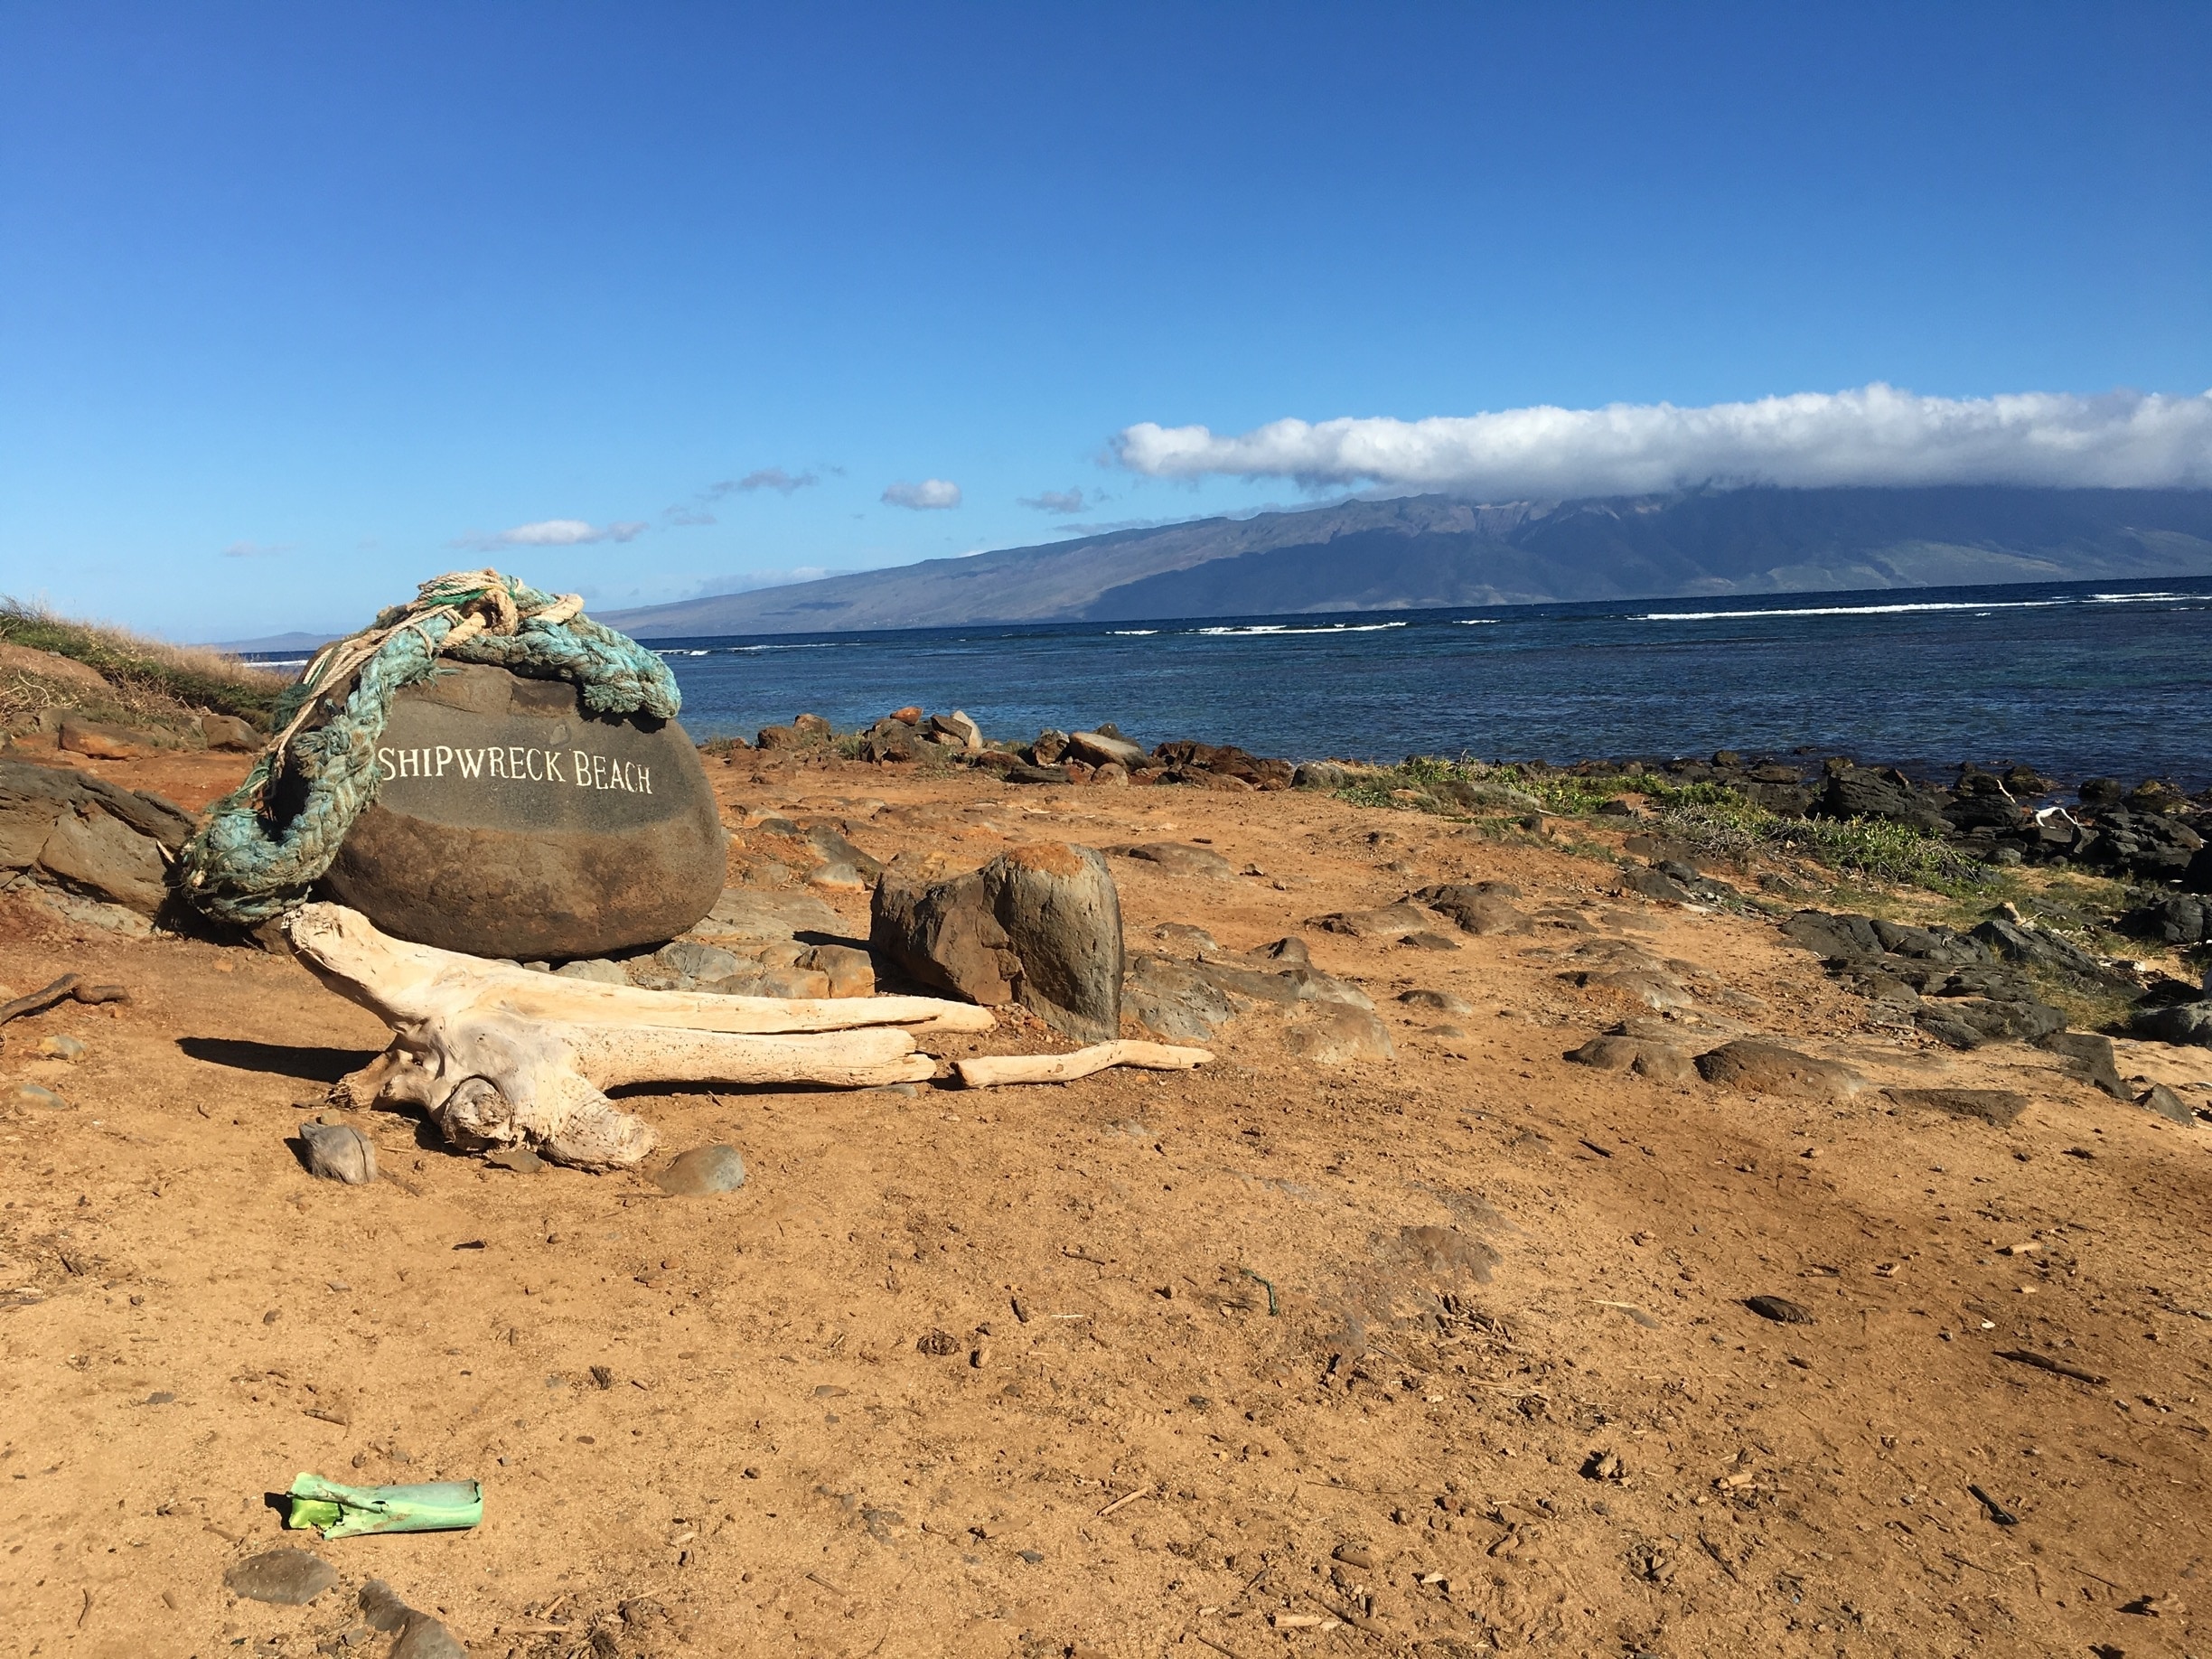 When in Lanai, rent a Jeep to explore the island! #lifeatexpedia